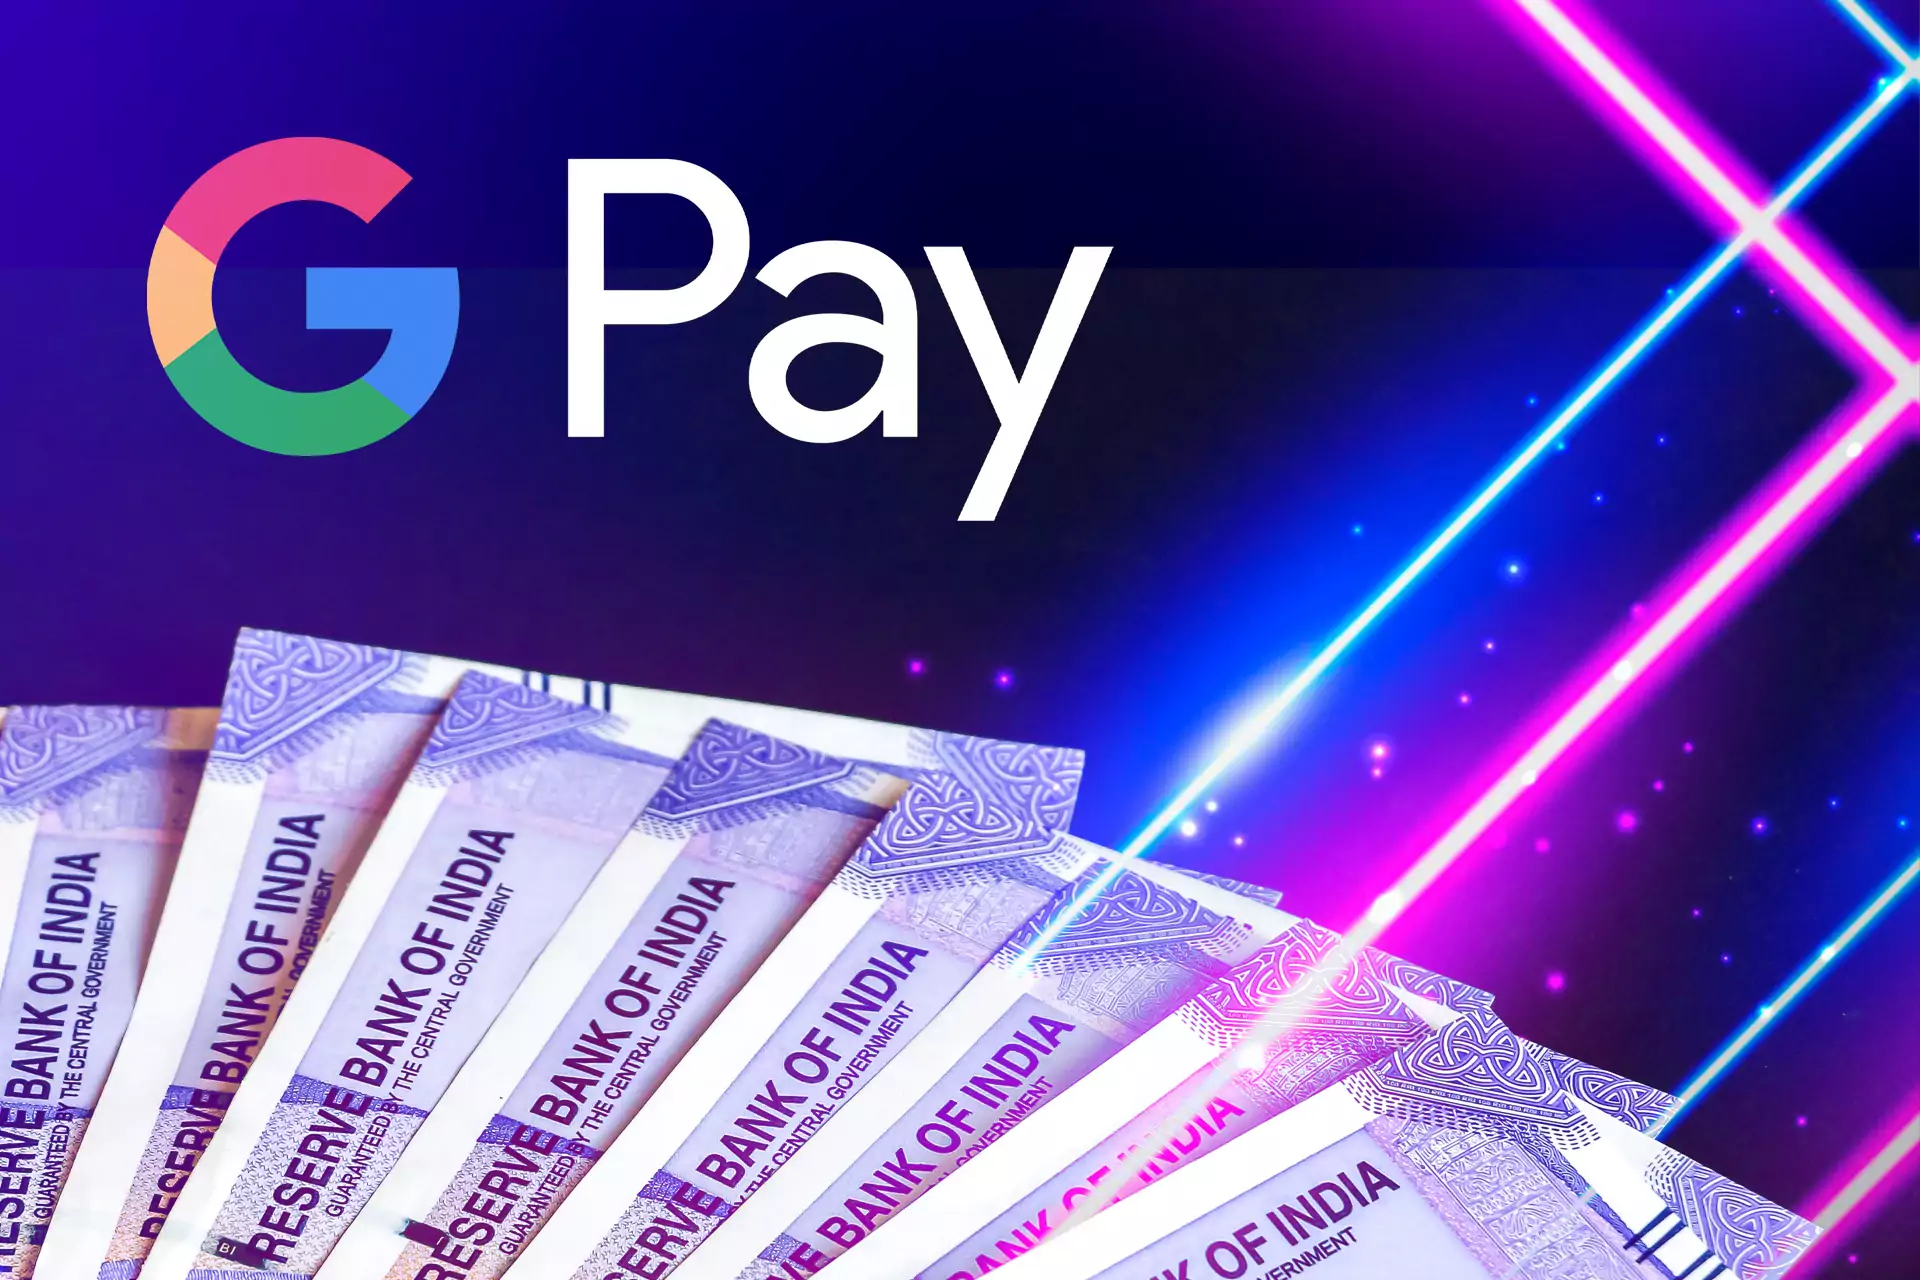 Google Pay is one of the most famous and trustworthy payment systems.